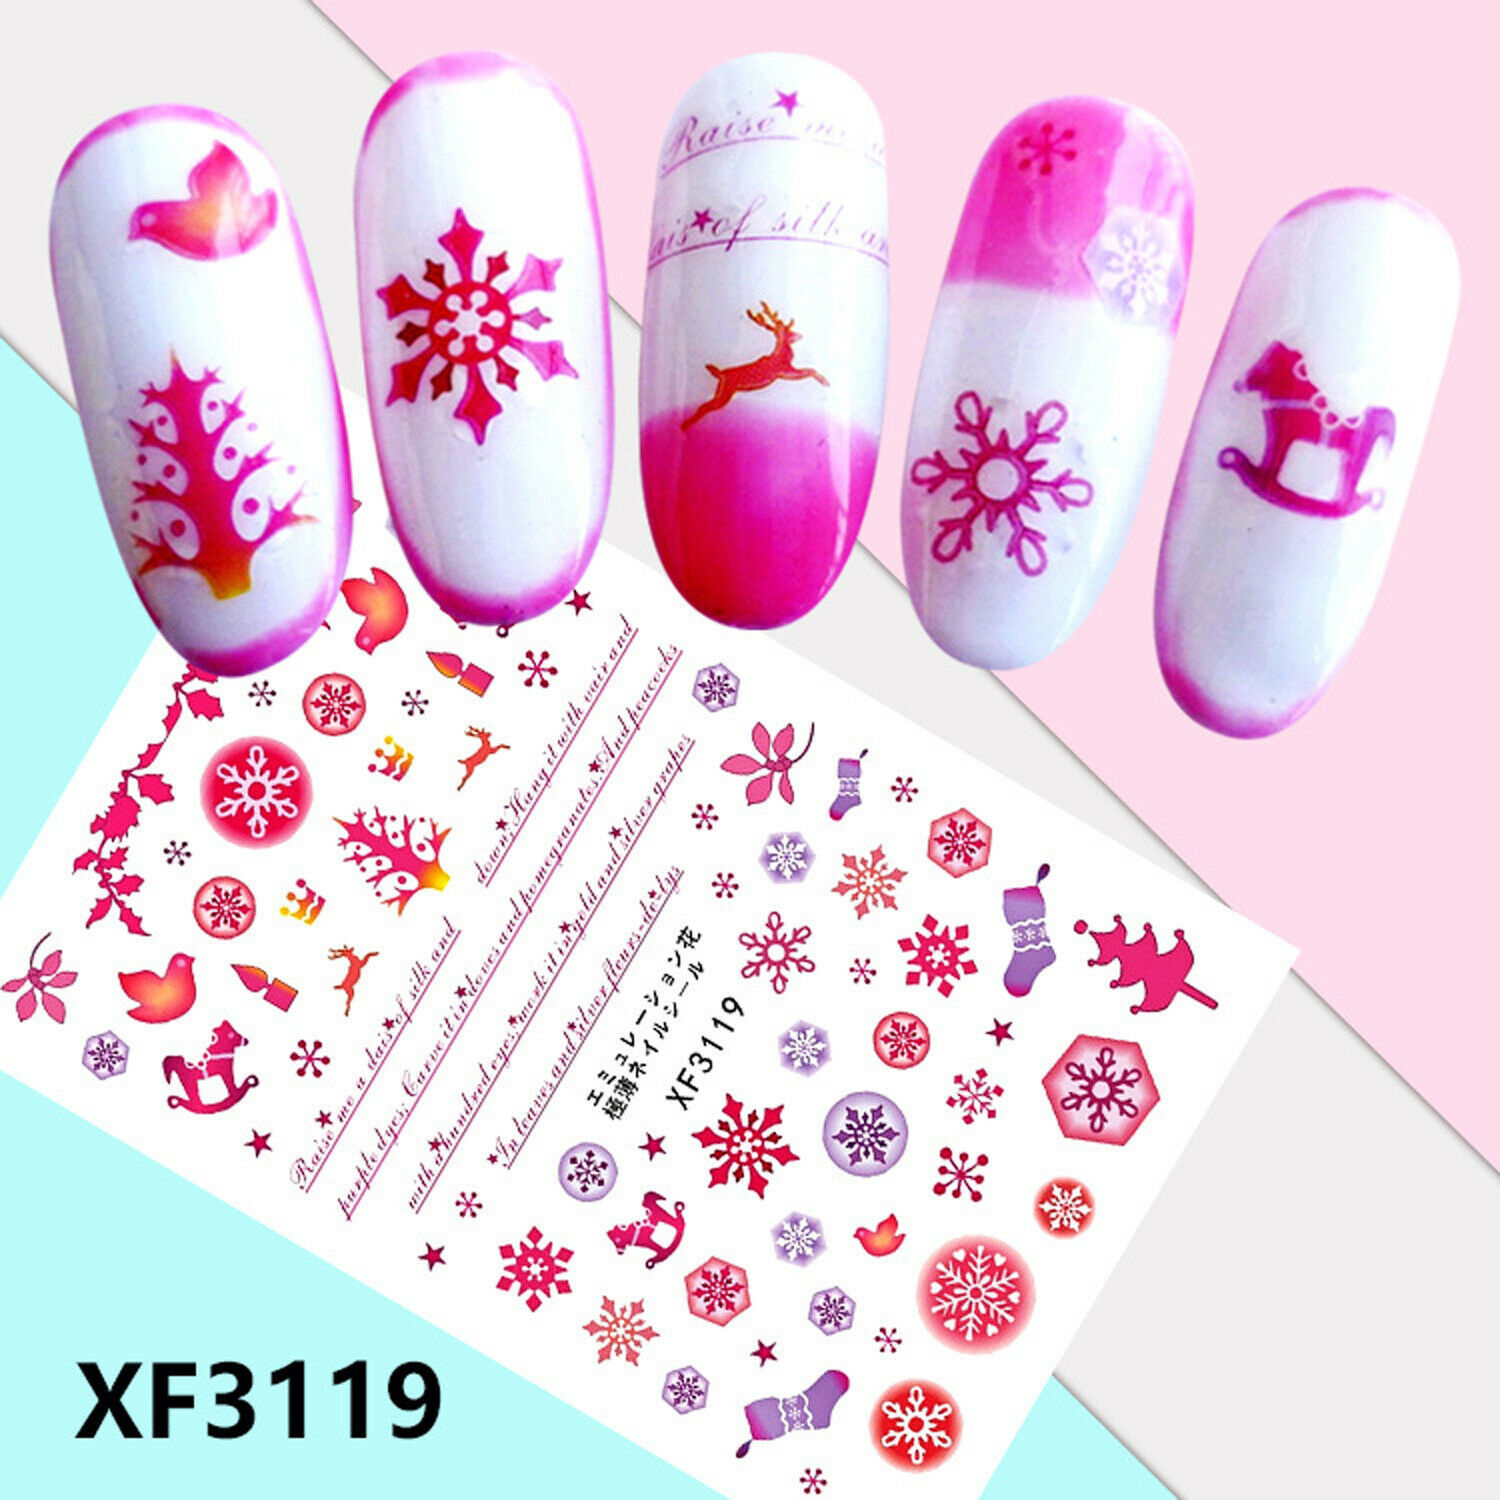 Nail Art 3D Decal Stickers deer snowflake candle crown Christmas tree XF3119